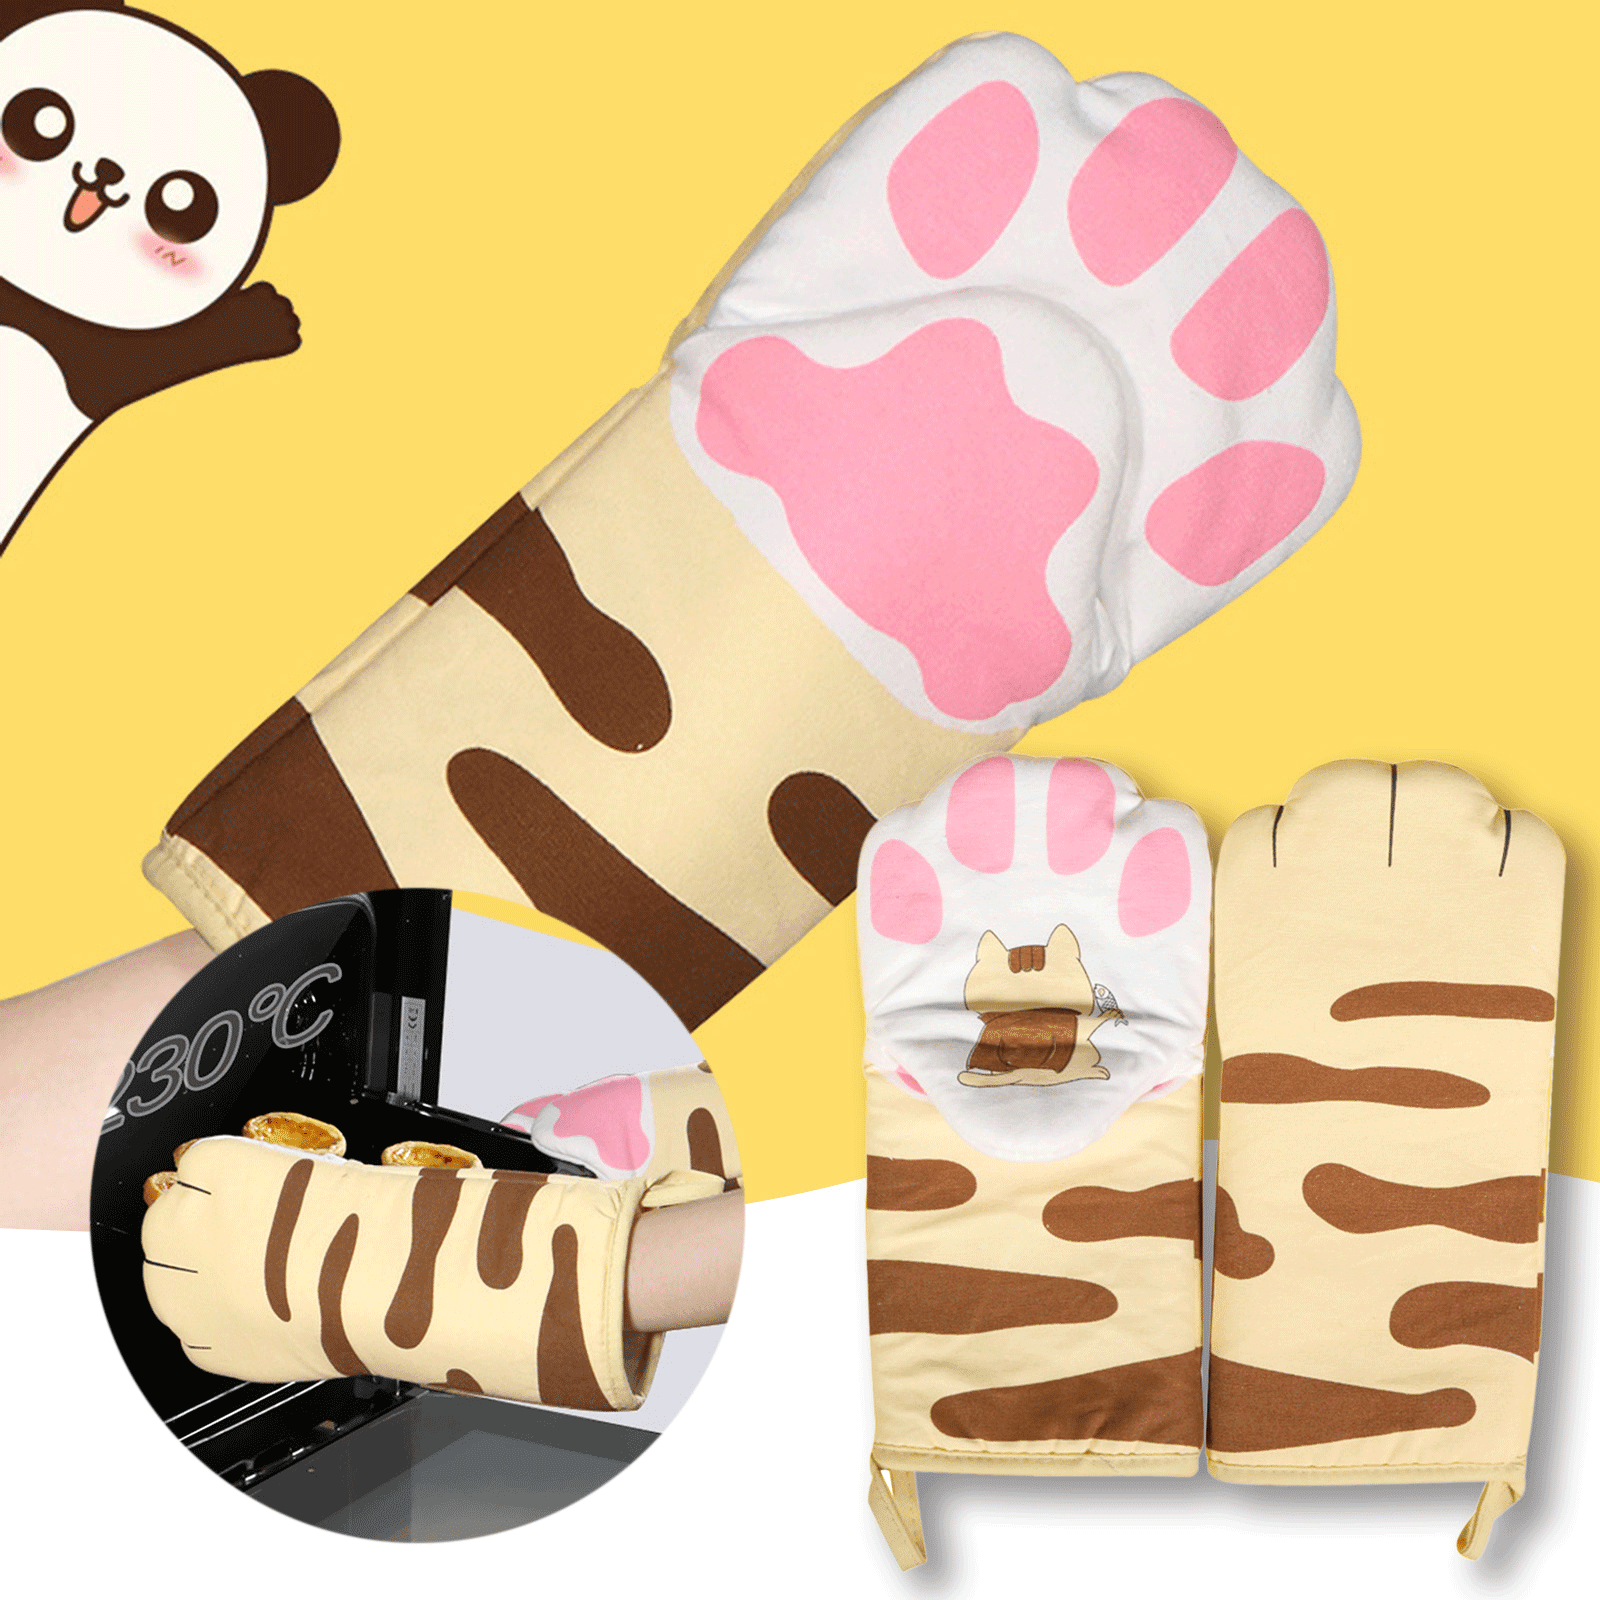 Silicone Oven Mitts Heat Resistant (One Pair) Cute Oven Mitts Pot Holders  for Kitchen Oven Gloves Silicon Oven Mitts Pair Cat Oven Mitts for Baking